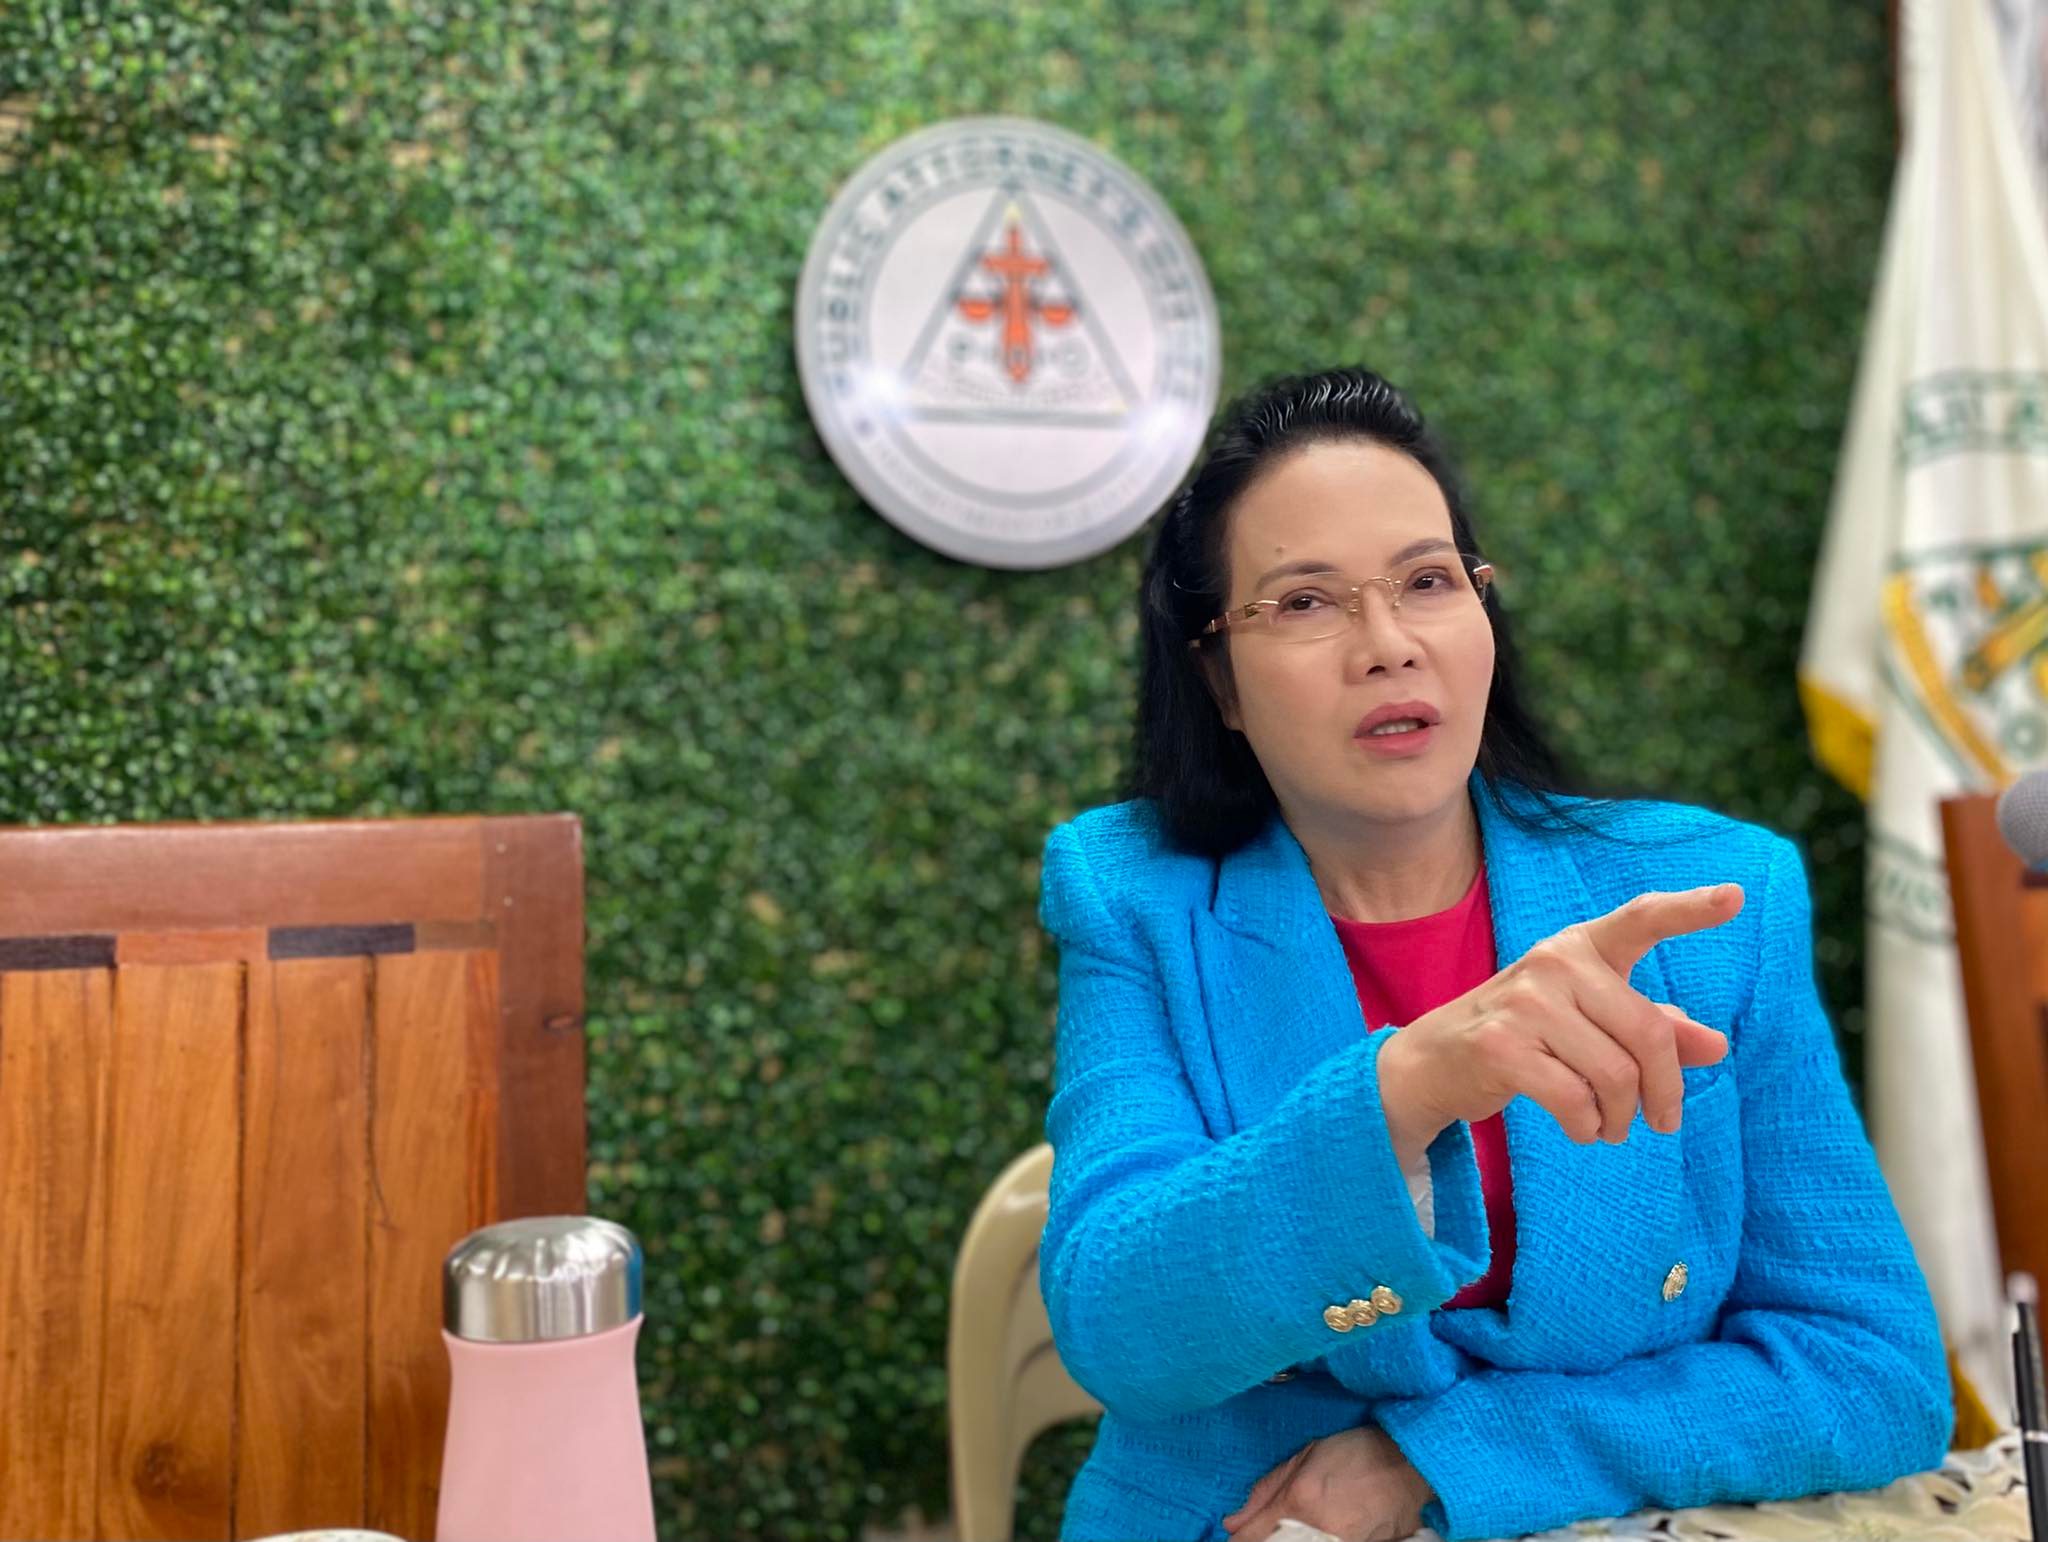 SC finds PAO chief Acosta guilty of indirect contempt, orders her to pay fine